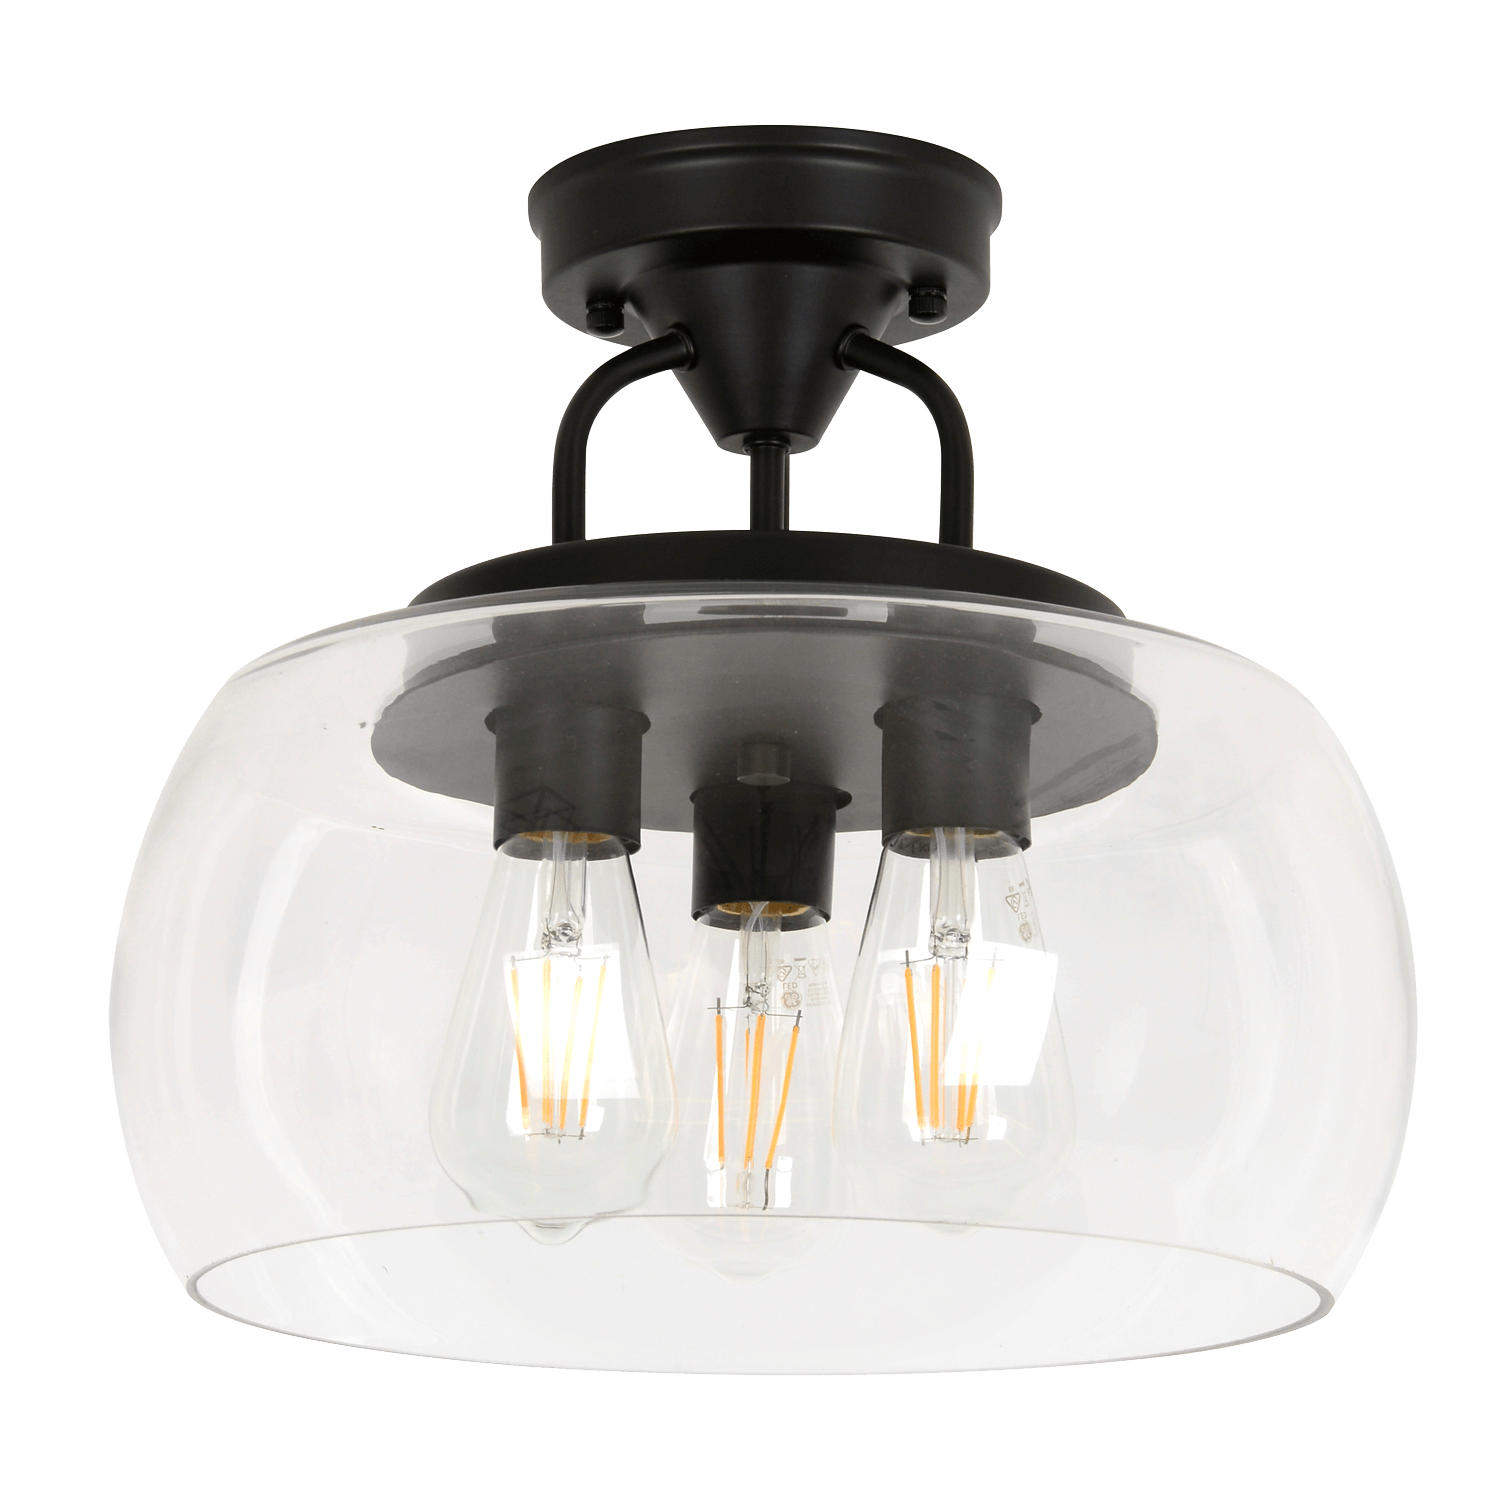 Matt Black and Open Glass Ceiling Light with the lampholders